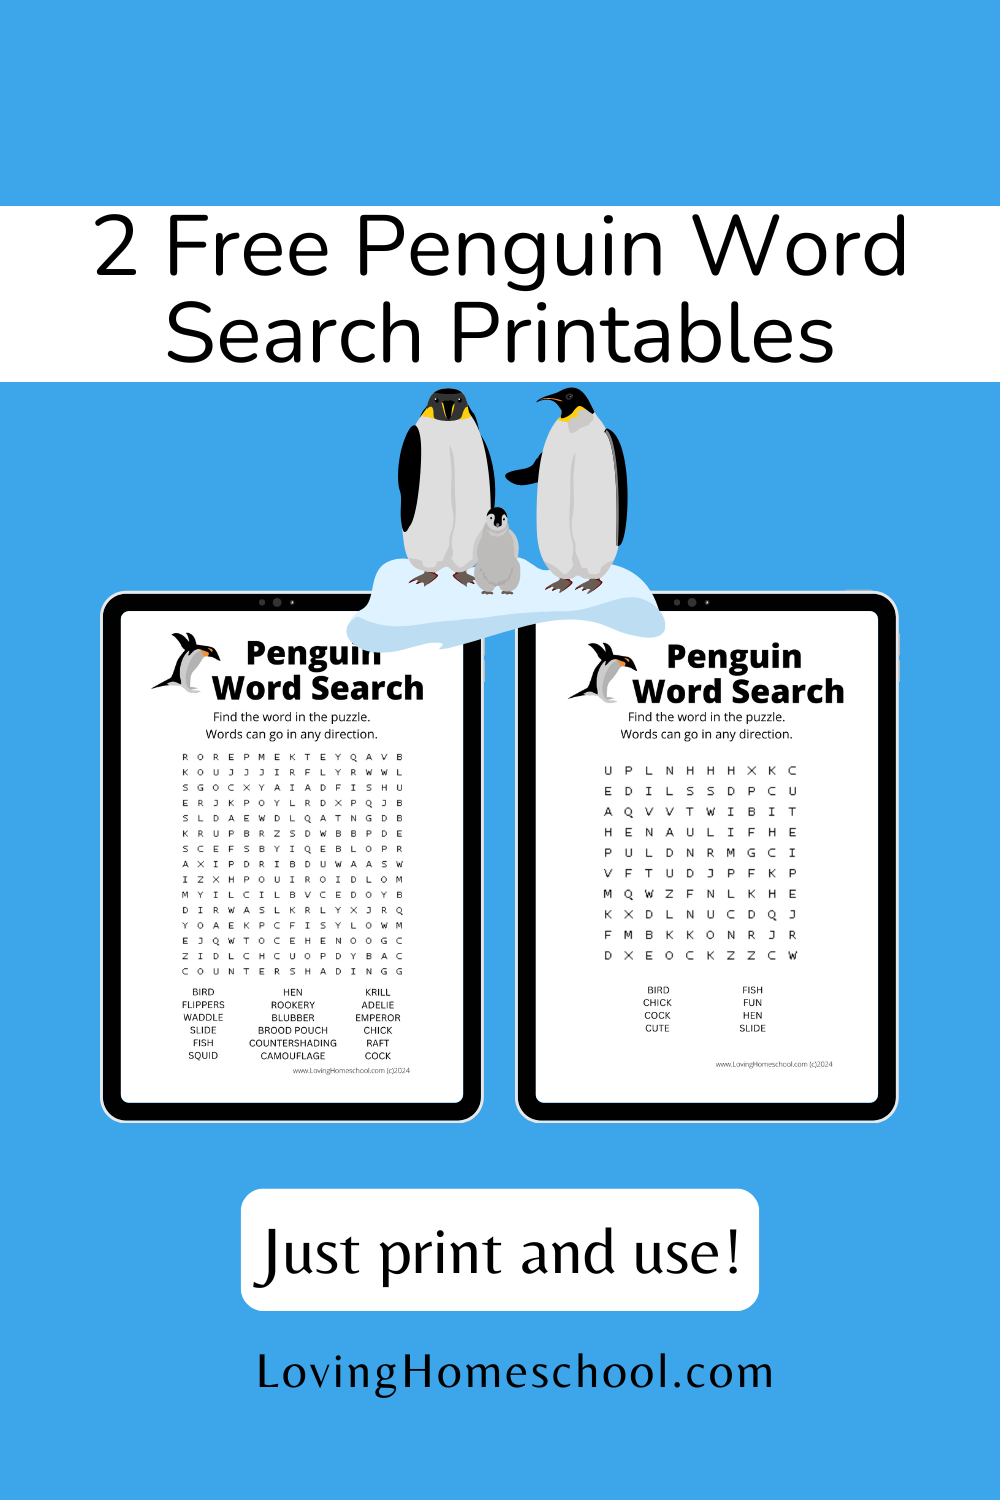 2 Free Penguin Word Search Printables Pinterest Pin